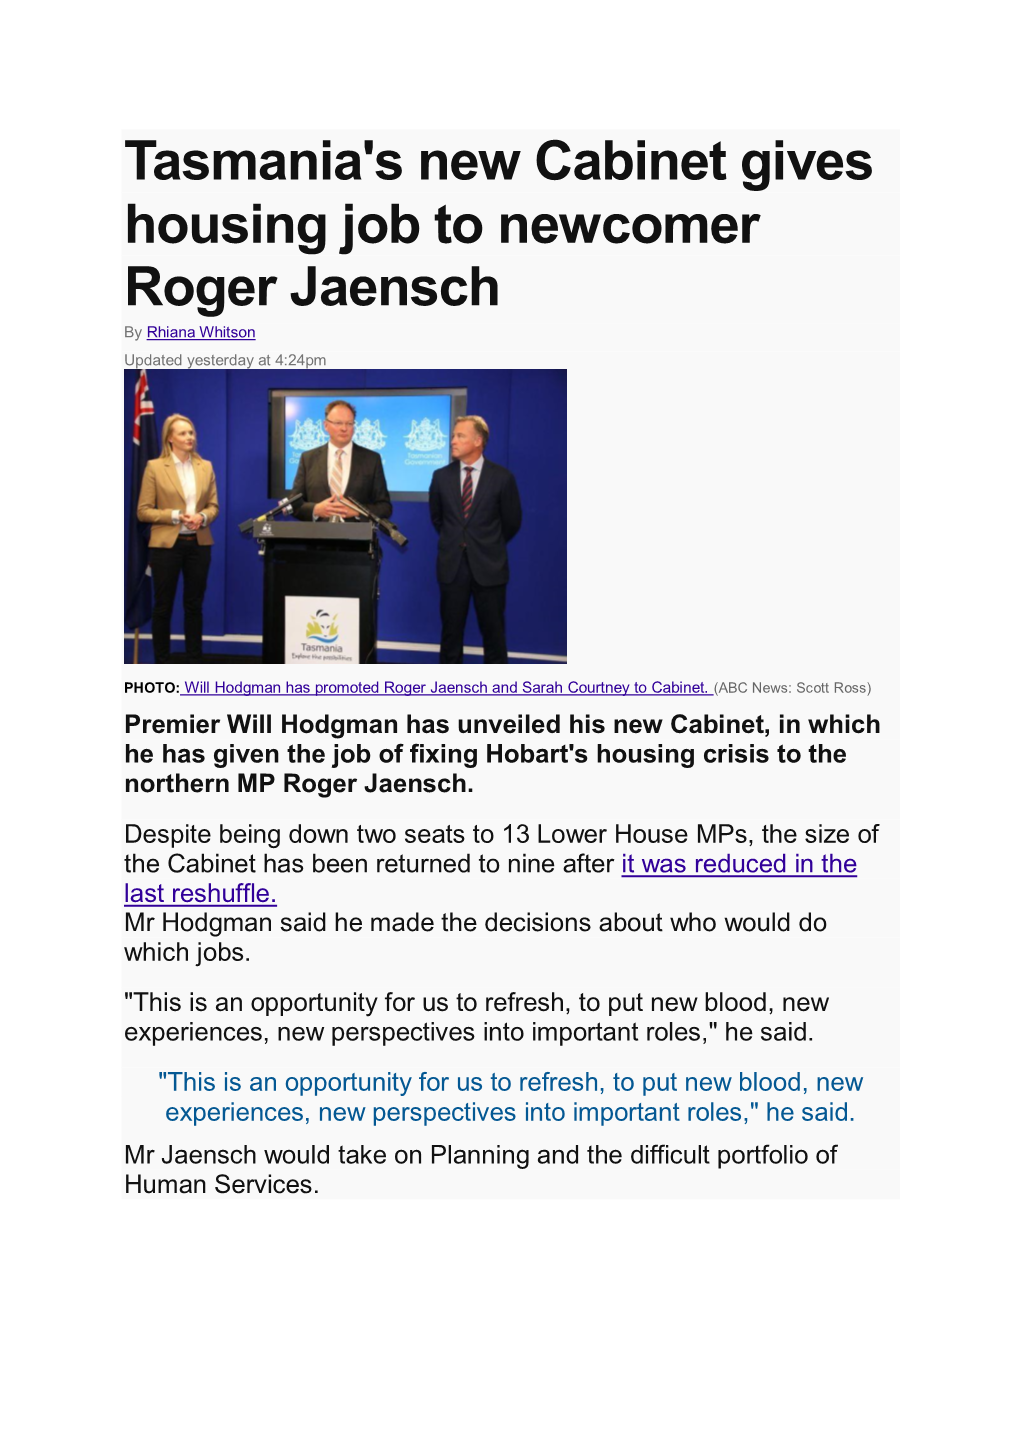 Tasmania's New Cabinet Gives Housing Job to Newcomer Roger Jaensch by Rhiana Whitson Updated Yesterday at 4:24Pm